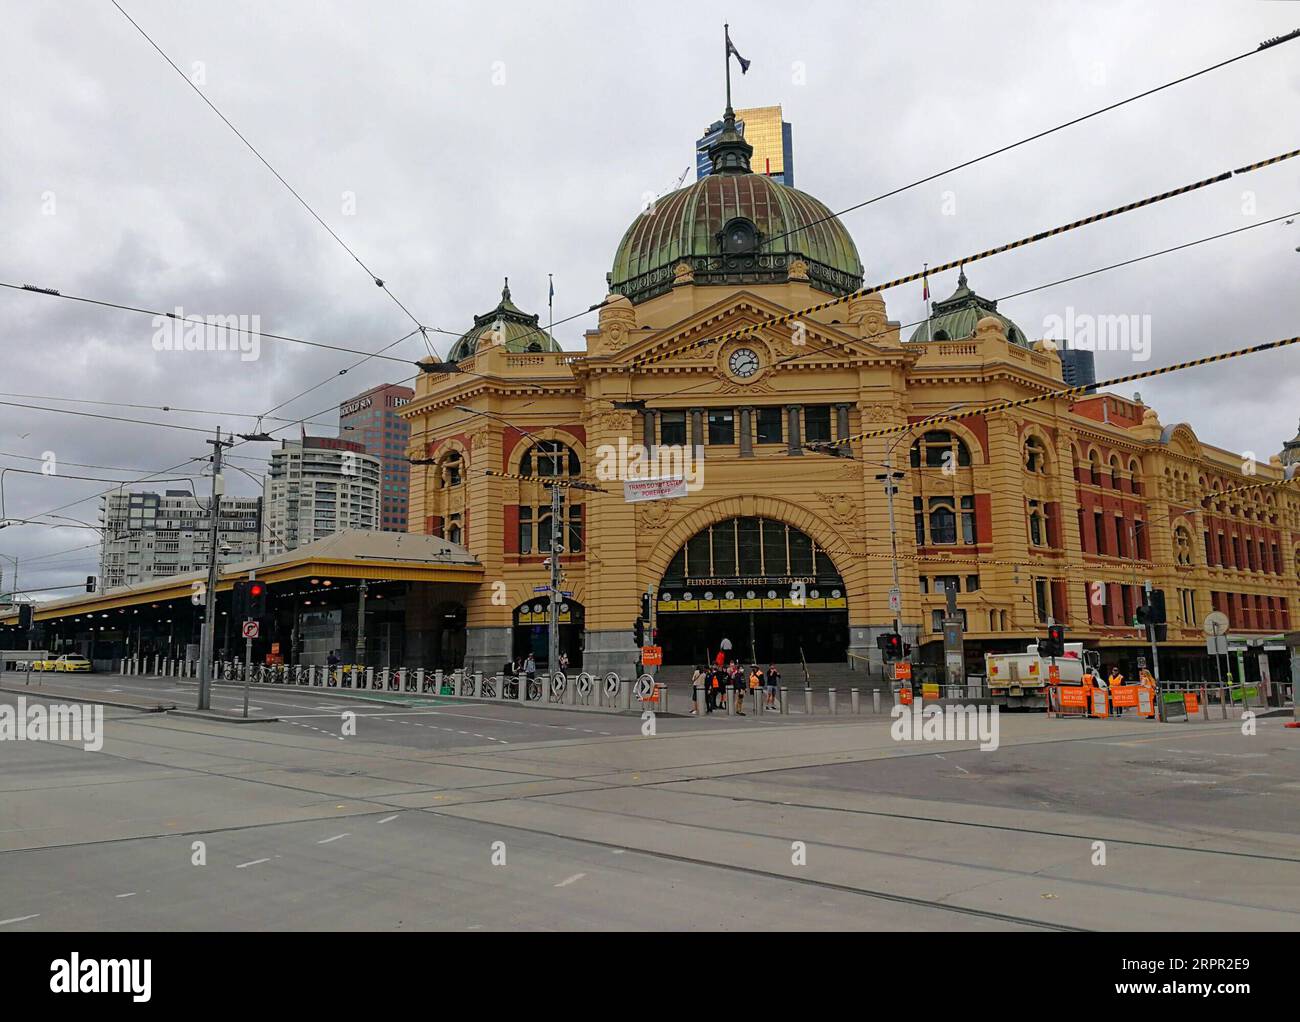 200325 -- MELBOURNE, March 25, 2020 Xinhua -- Mobile photo shows few people standing in front of the Flinders Street Station in Melbourne, Australia, March 25, 2020. As of 3:00 p.m. local time Wednesday, there are 2,423 confirmed cases of COVID-19 in Australia, according to the country s Health Department. Photo by Gui Qing/Xinhua AUSTRALIA-MELBOURNE-COVID-19 PUBLICATIONxNOTxINxCHN Stock Photo